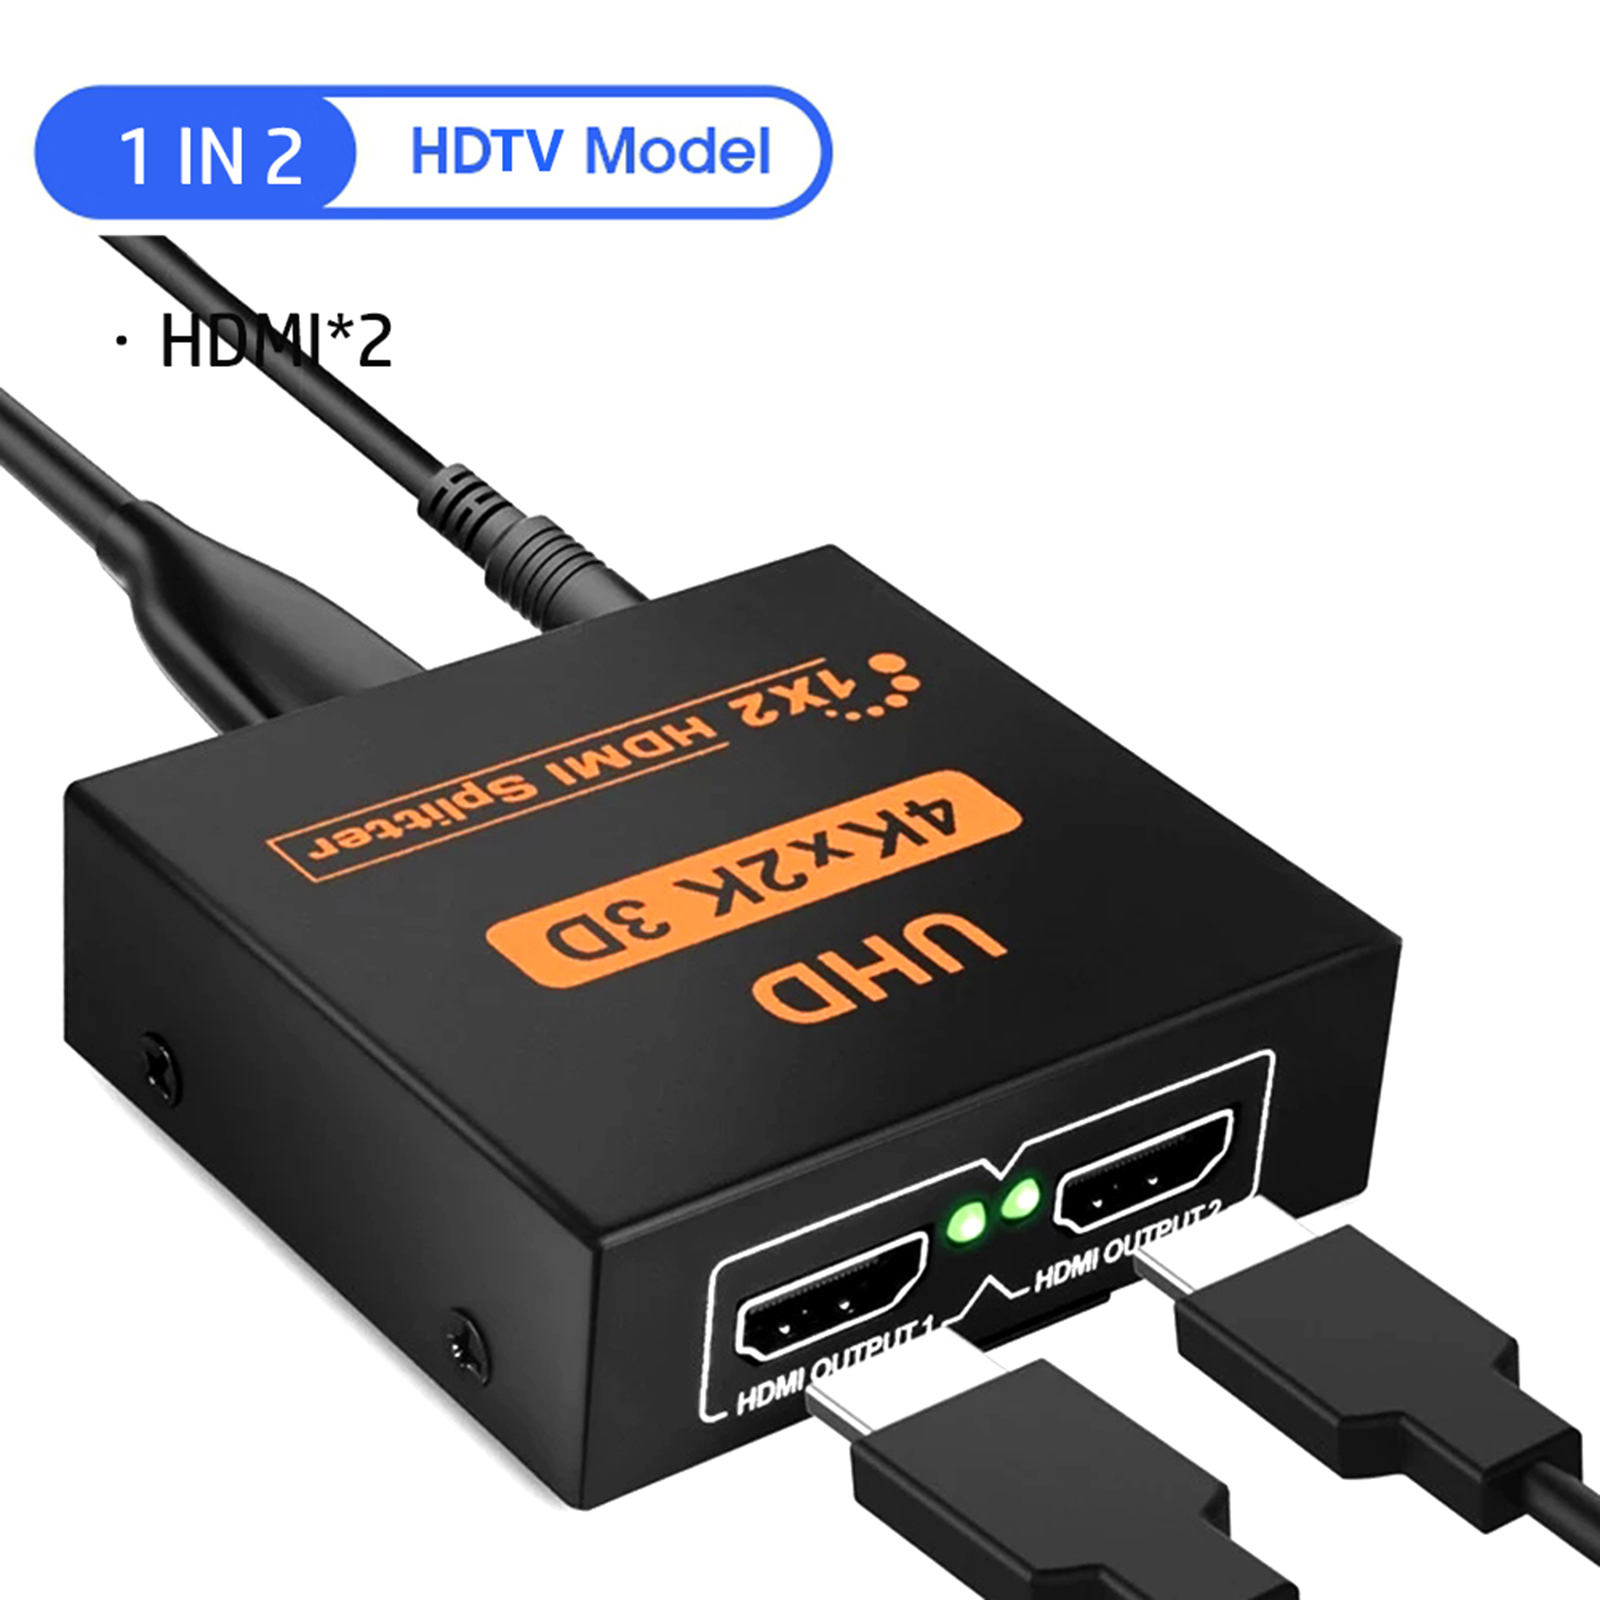 4k x 2k Hd HDMI 対応スプリッター 1 In 2 Out HDMI 対応スプリッター スイッチャー 1 x 2 テレビ コンピューター モニター ゲーム機器用